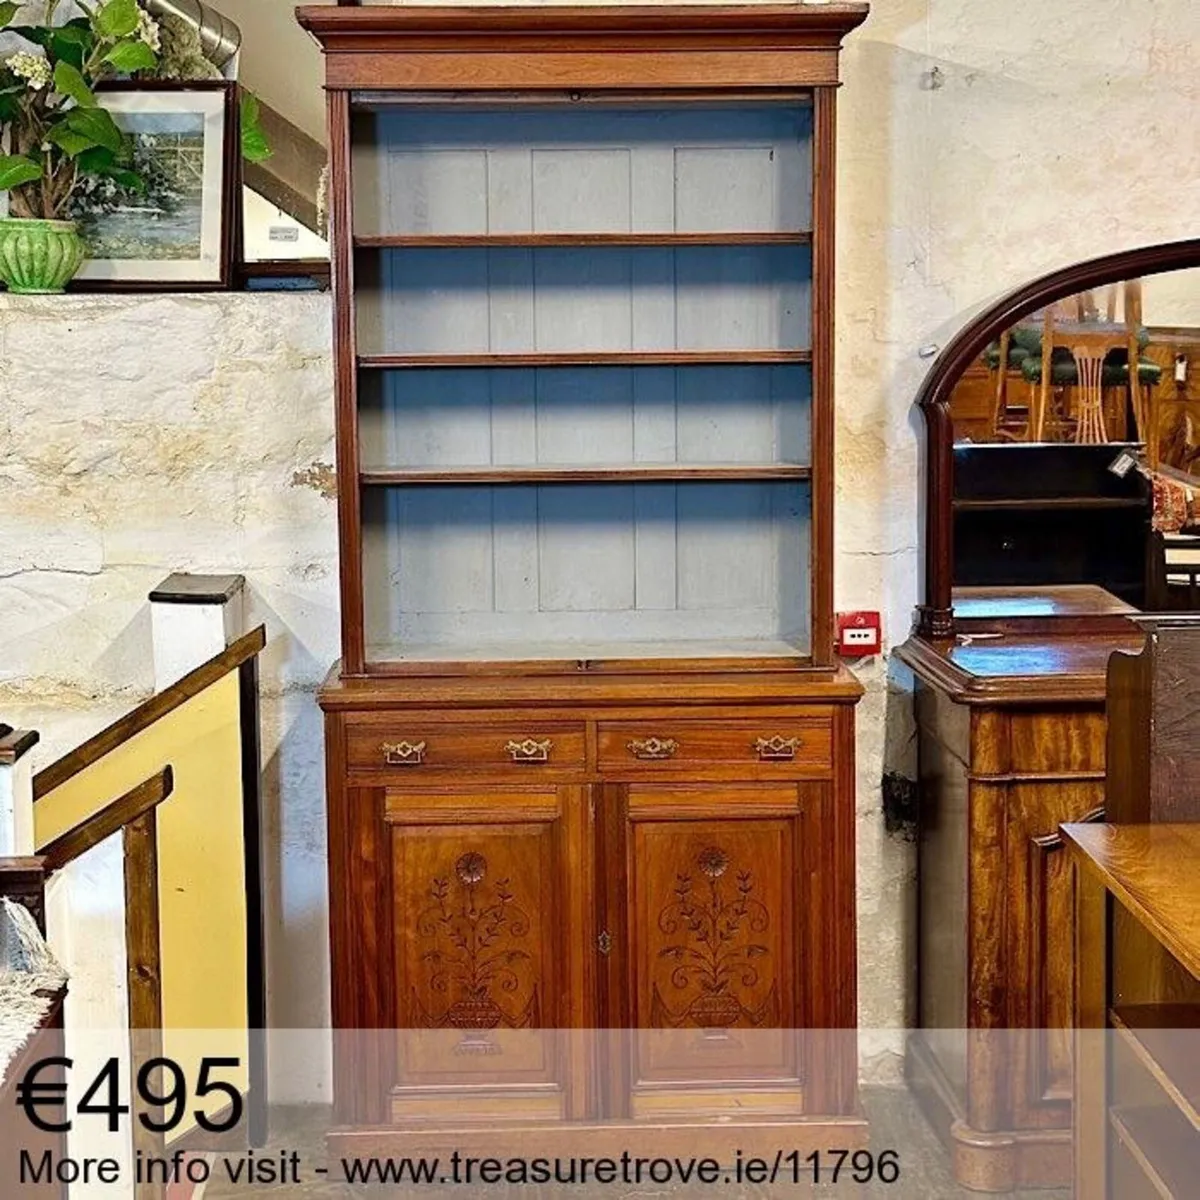 Antique and Vintage Bookcases - Image 1